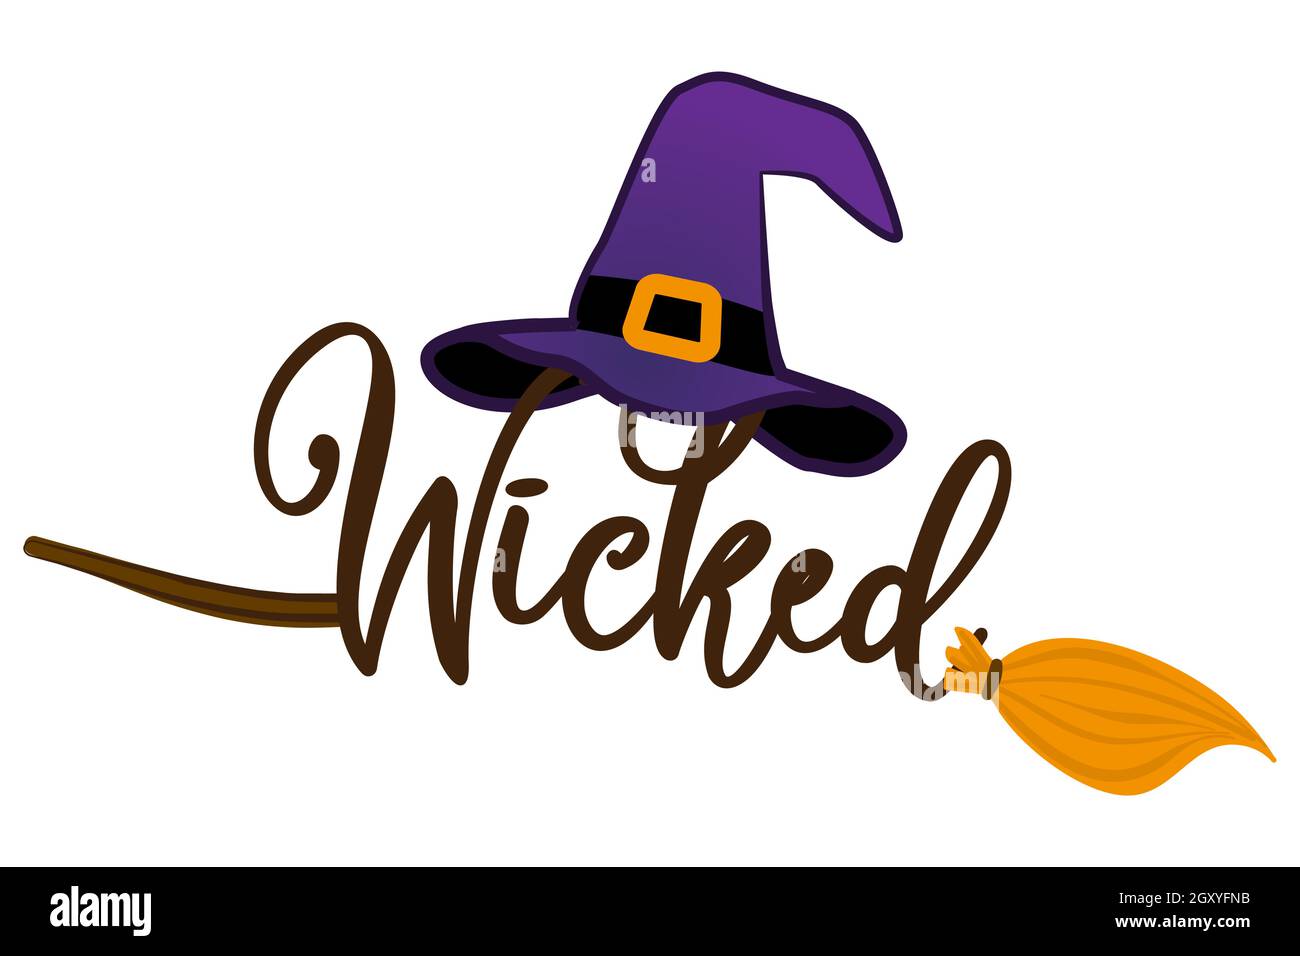 Wicked - Halloween quote on white background with broom, bats, witch hat and Witch's legs. Good for t-shirt, mug, scrap booking, gift, printing press. Stock Vector